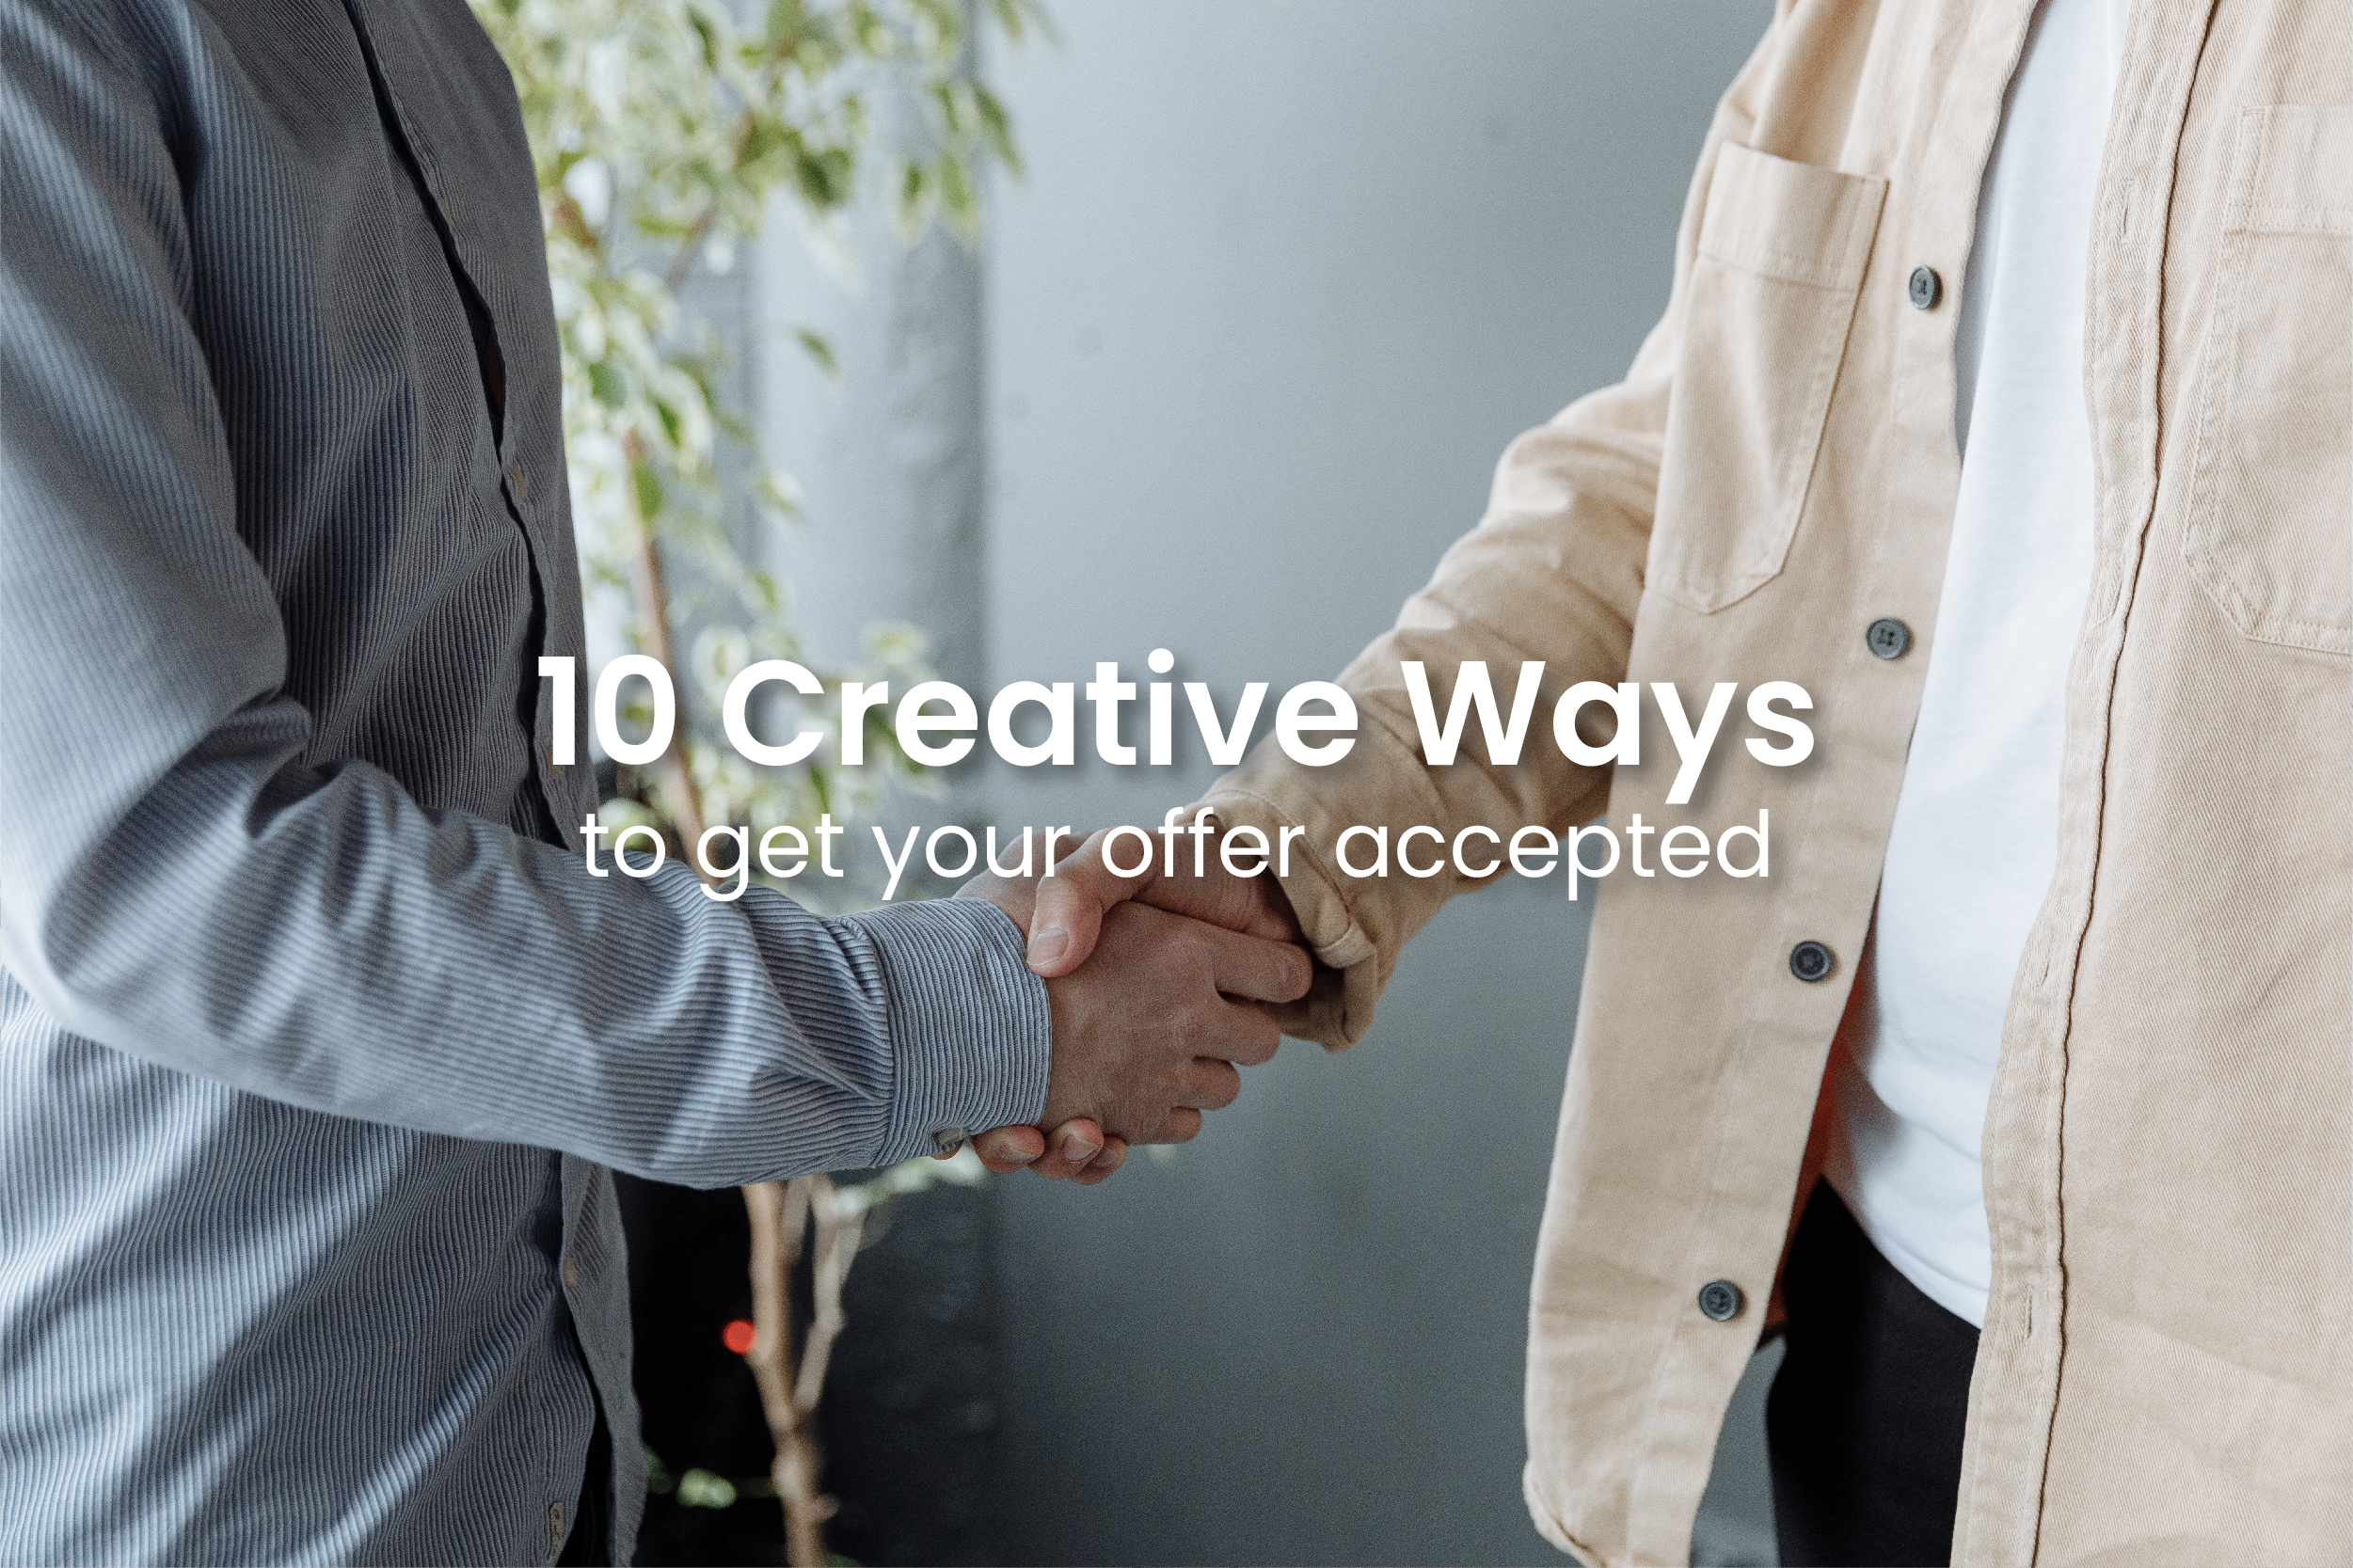 10 Creative Ways to Get Your Offer Accepted